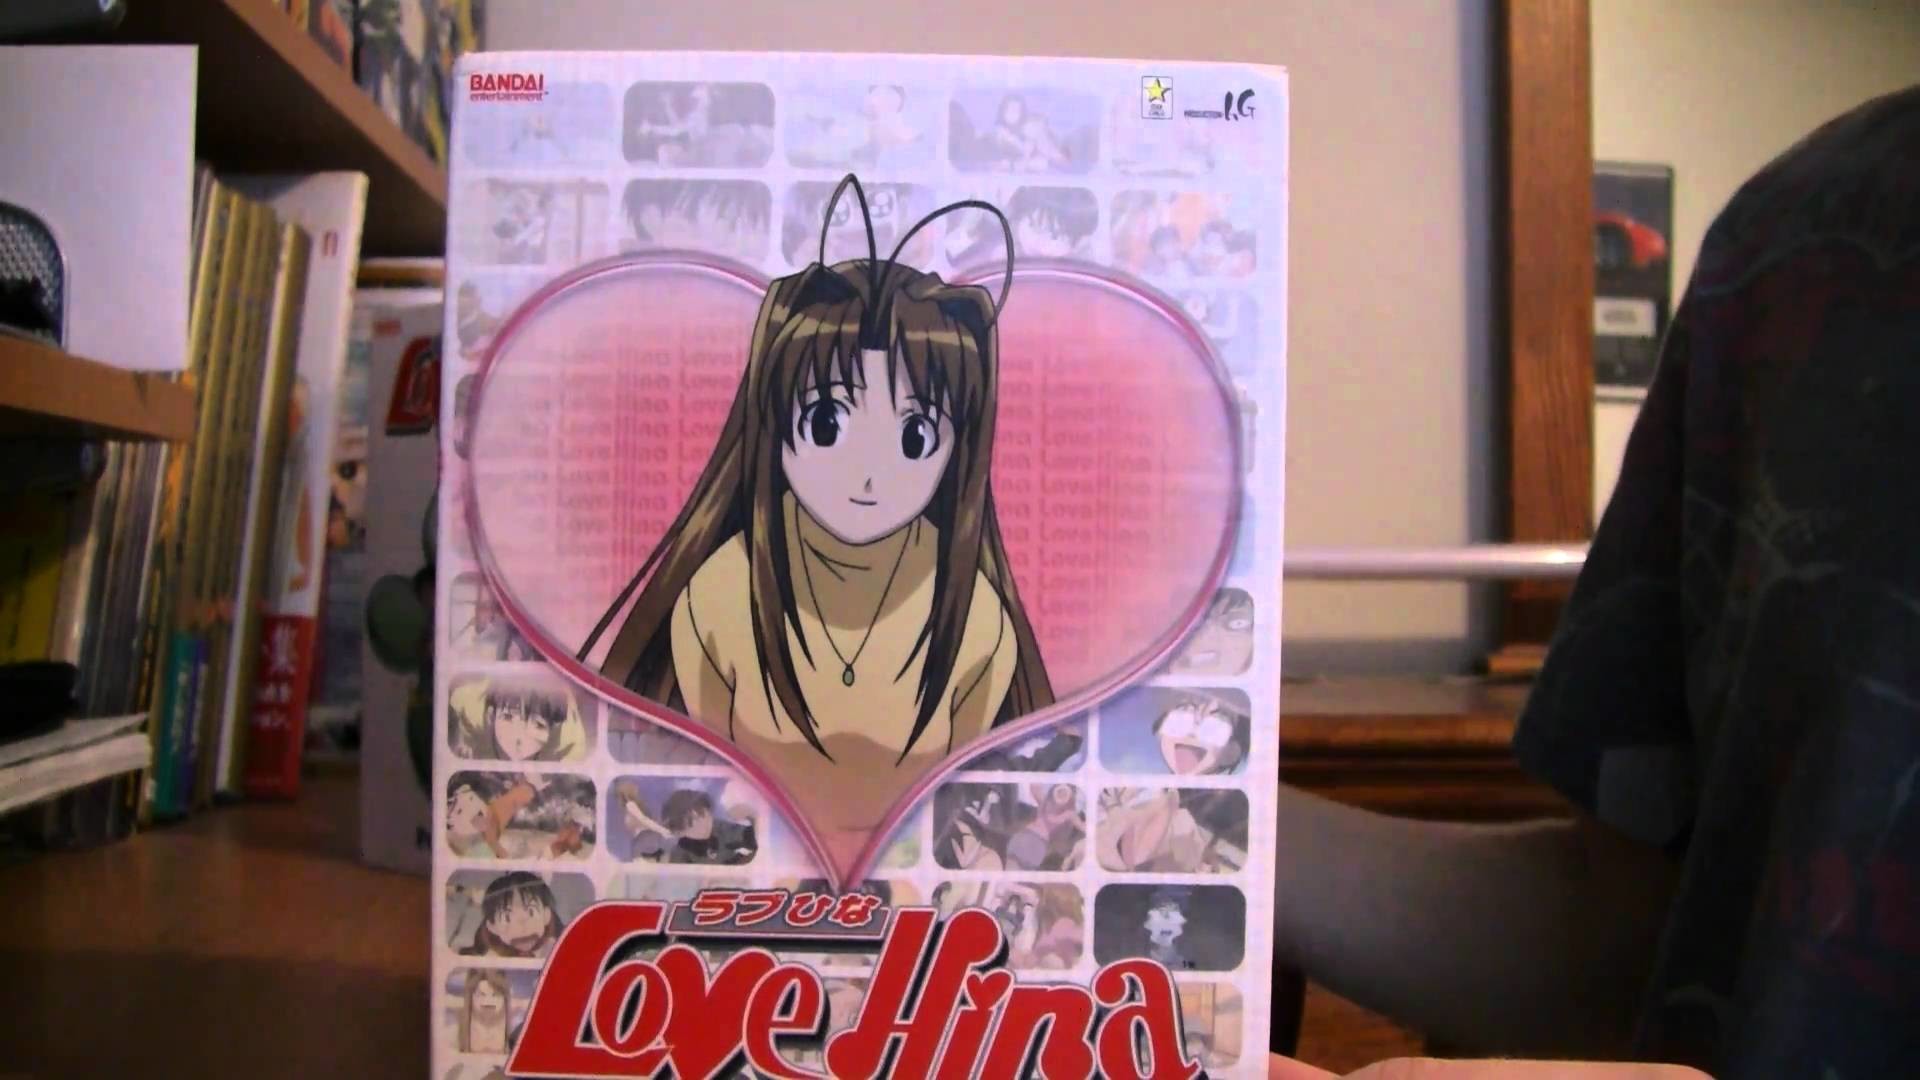 1920x1080 Love Hina: Perfect Collection - Unboxing